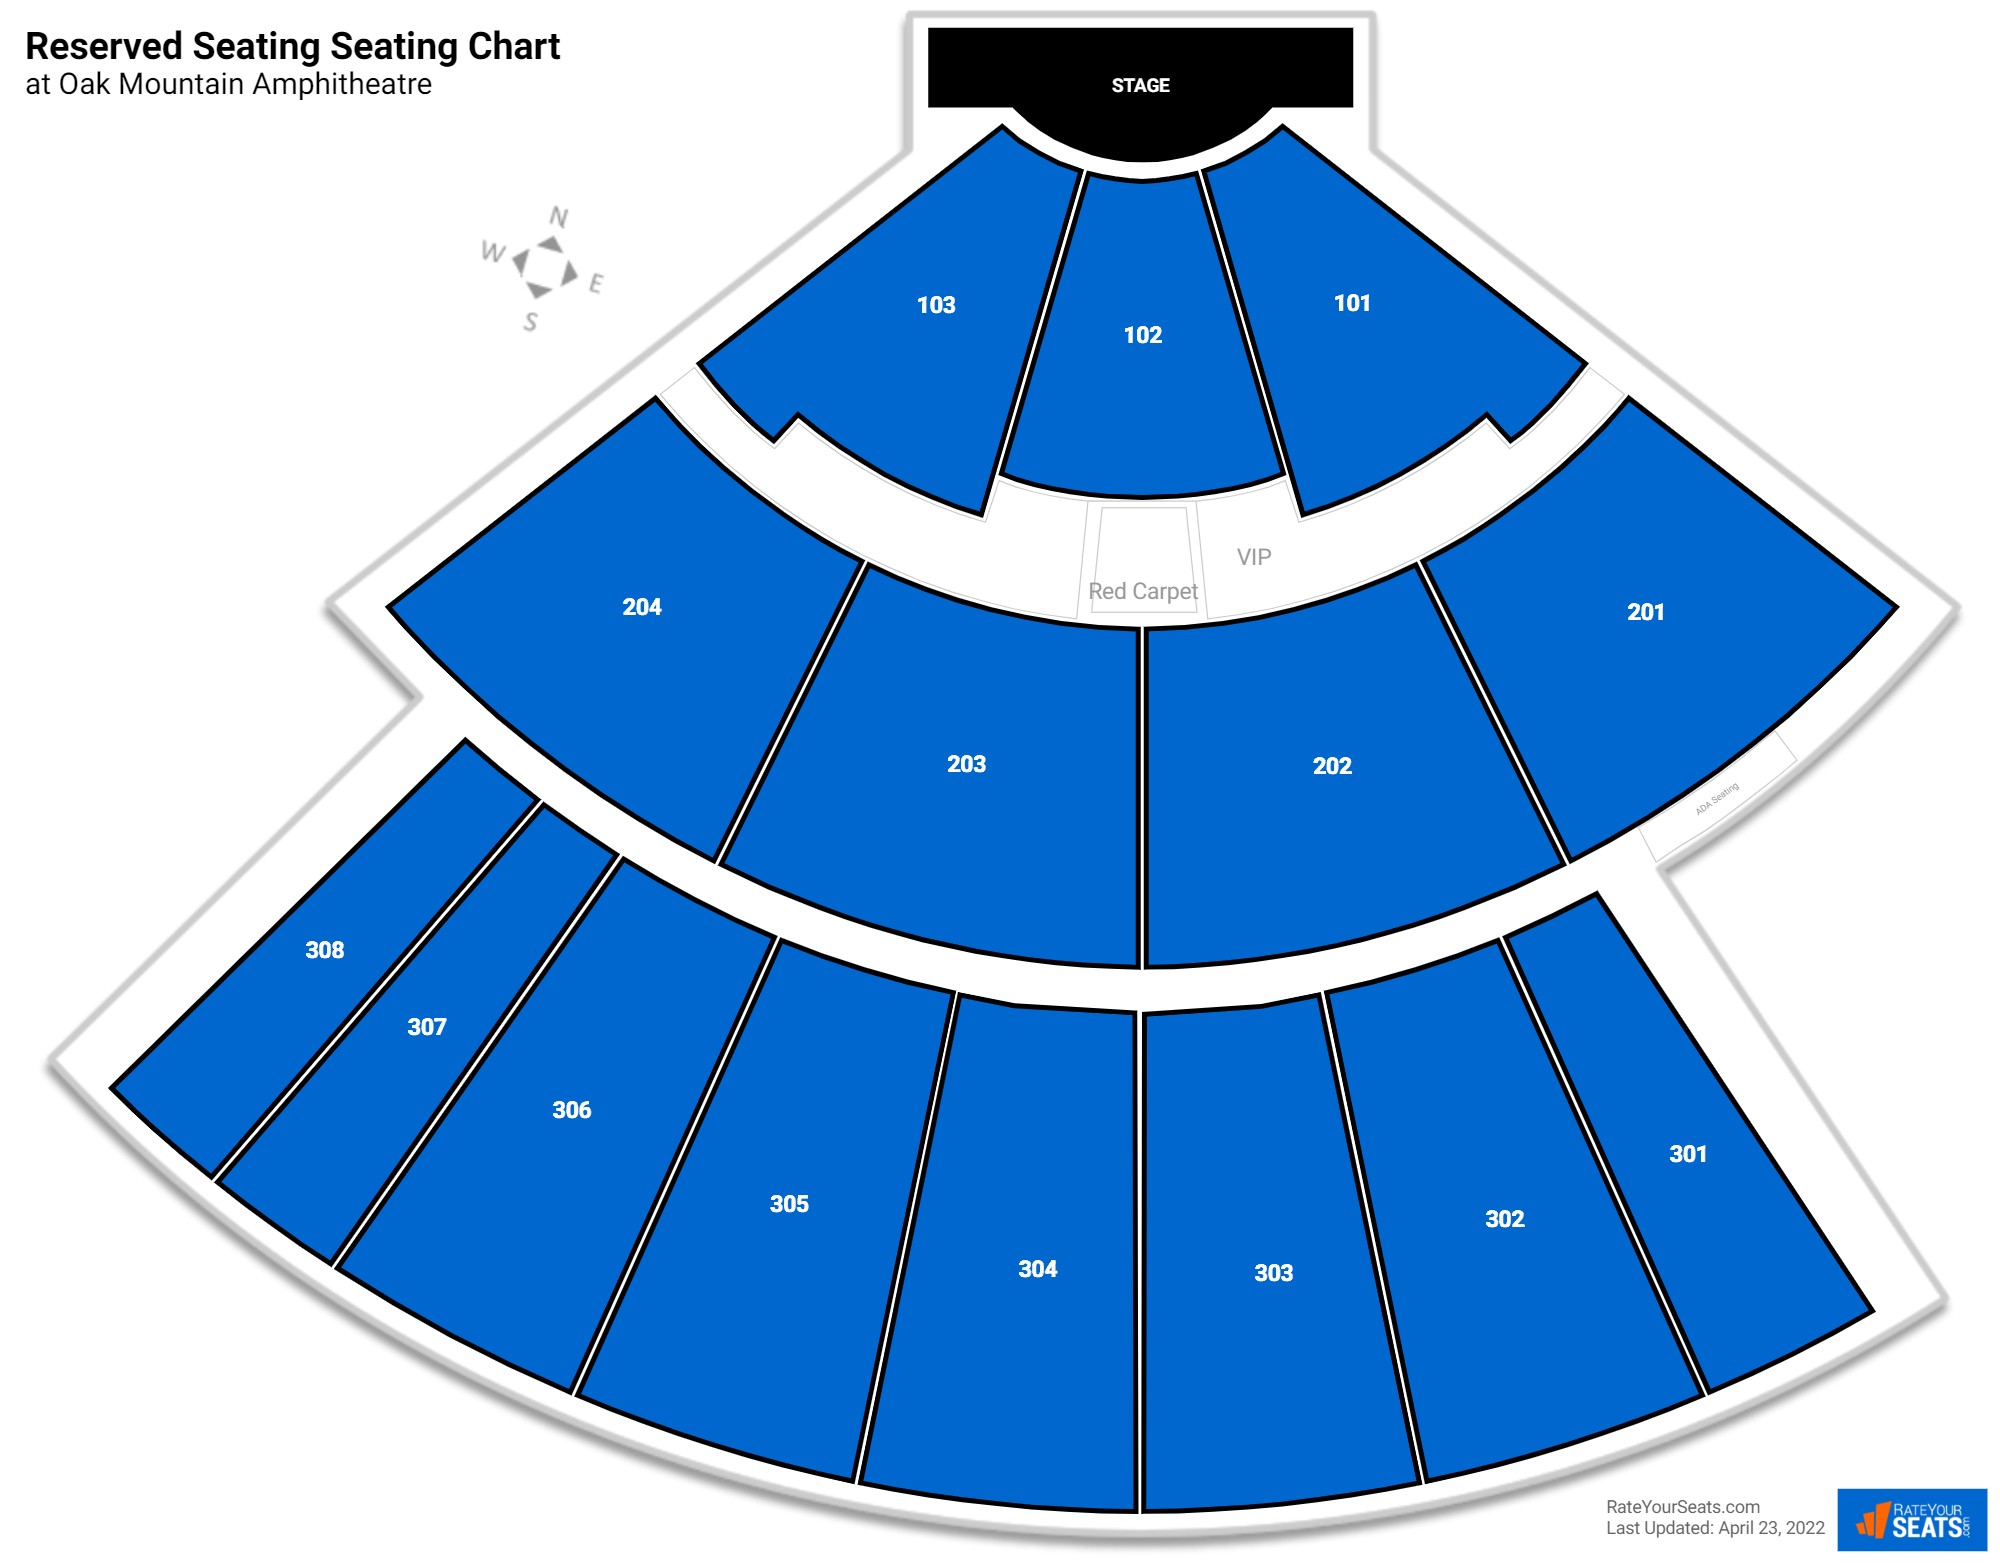 Concert Reserved Seating Seating Chart at Oak Mountain Amphitheatre